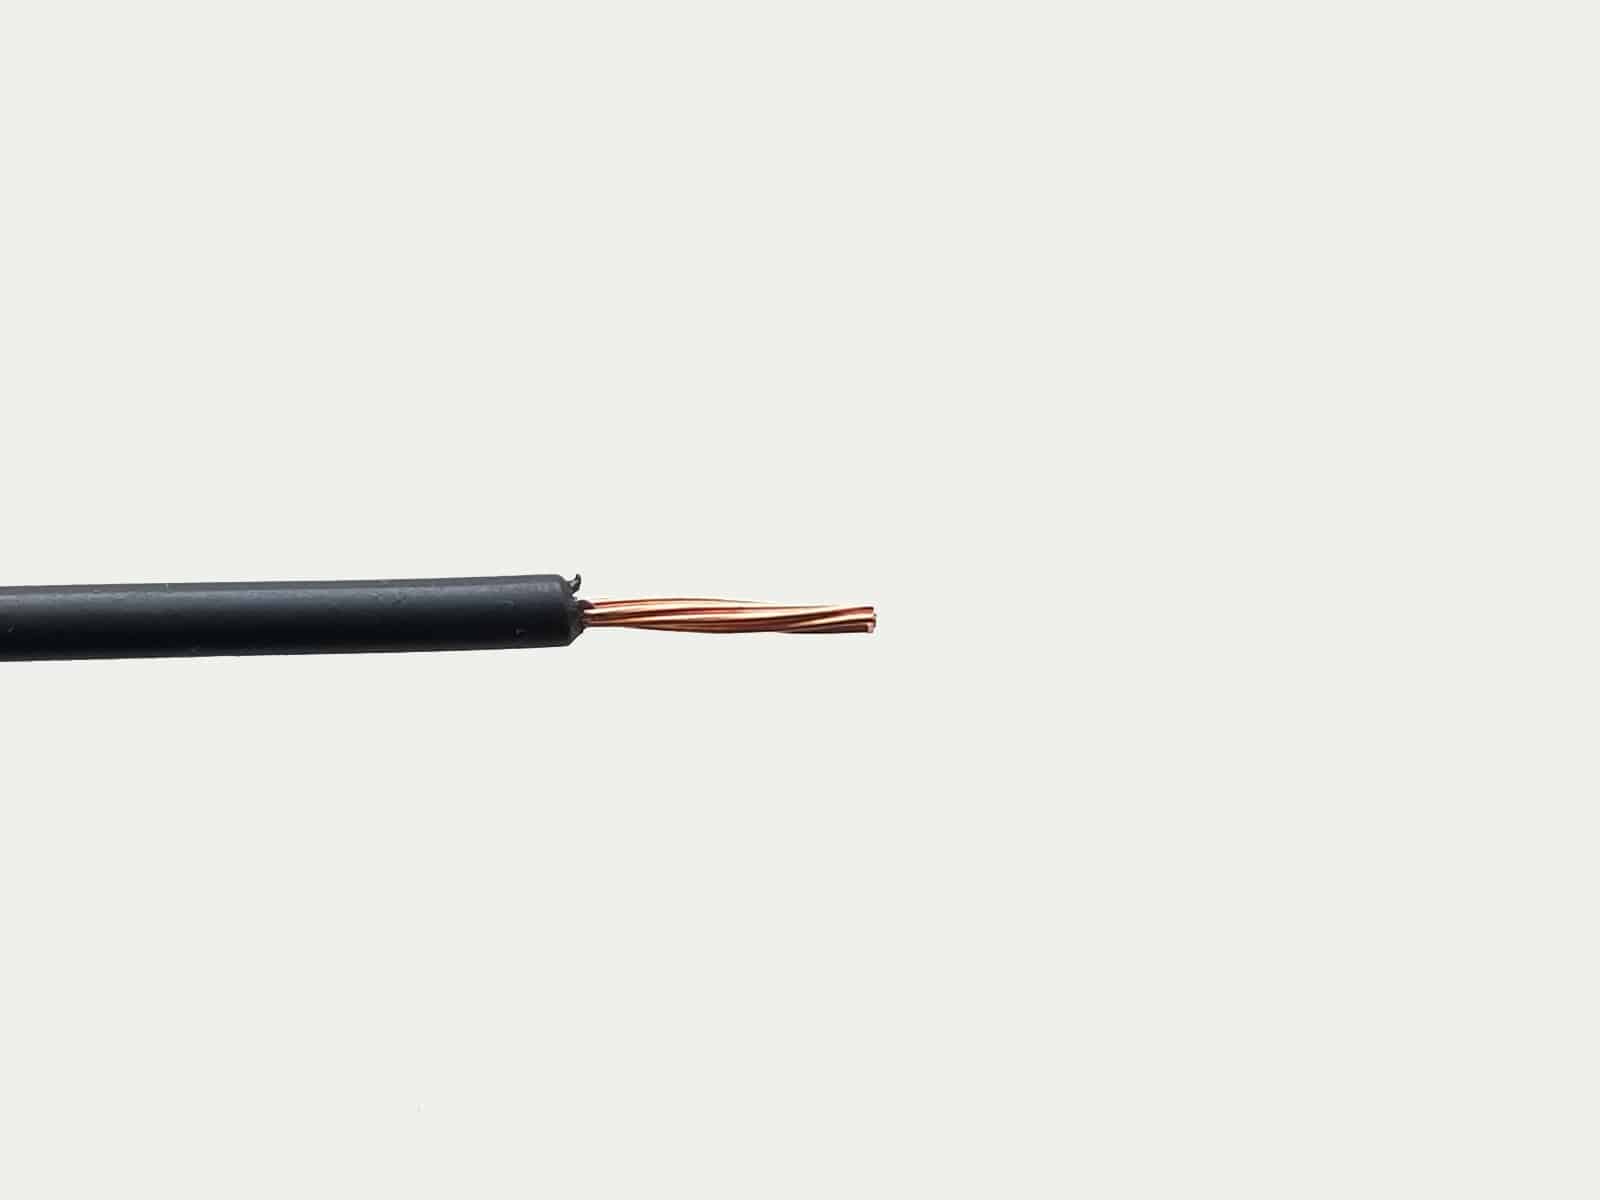 Flat Power Cable - 2 Conductor - 10mm - 10mm 1 Feet